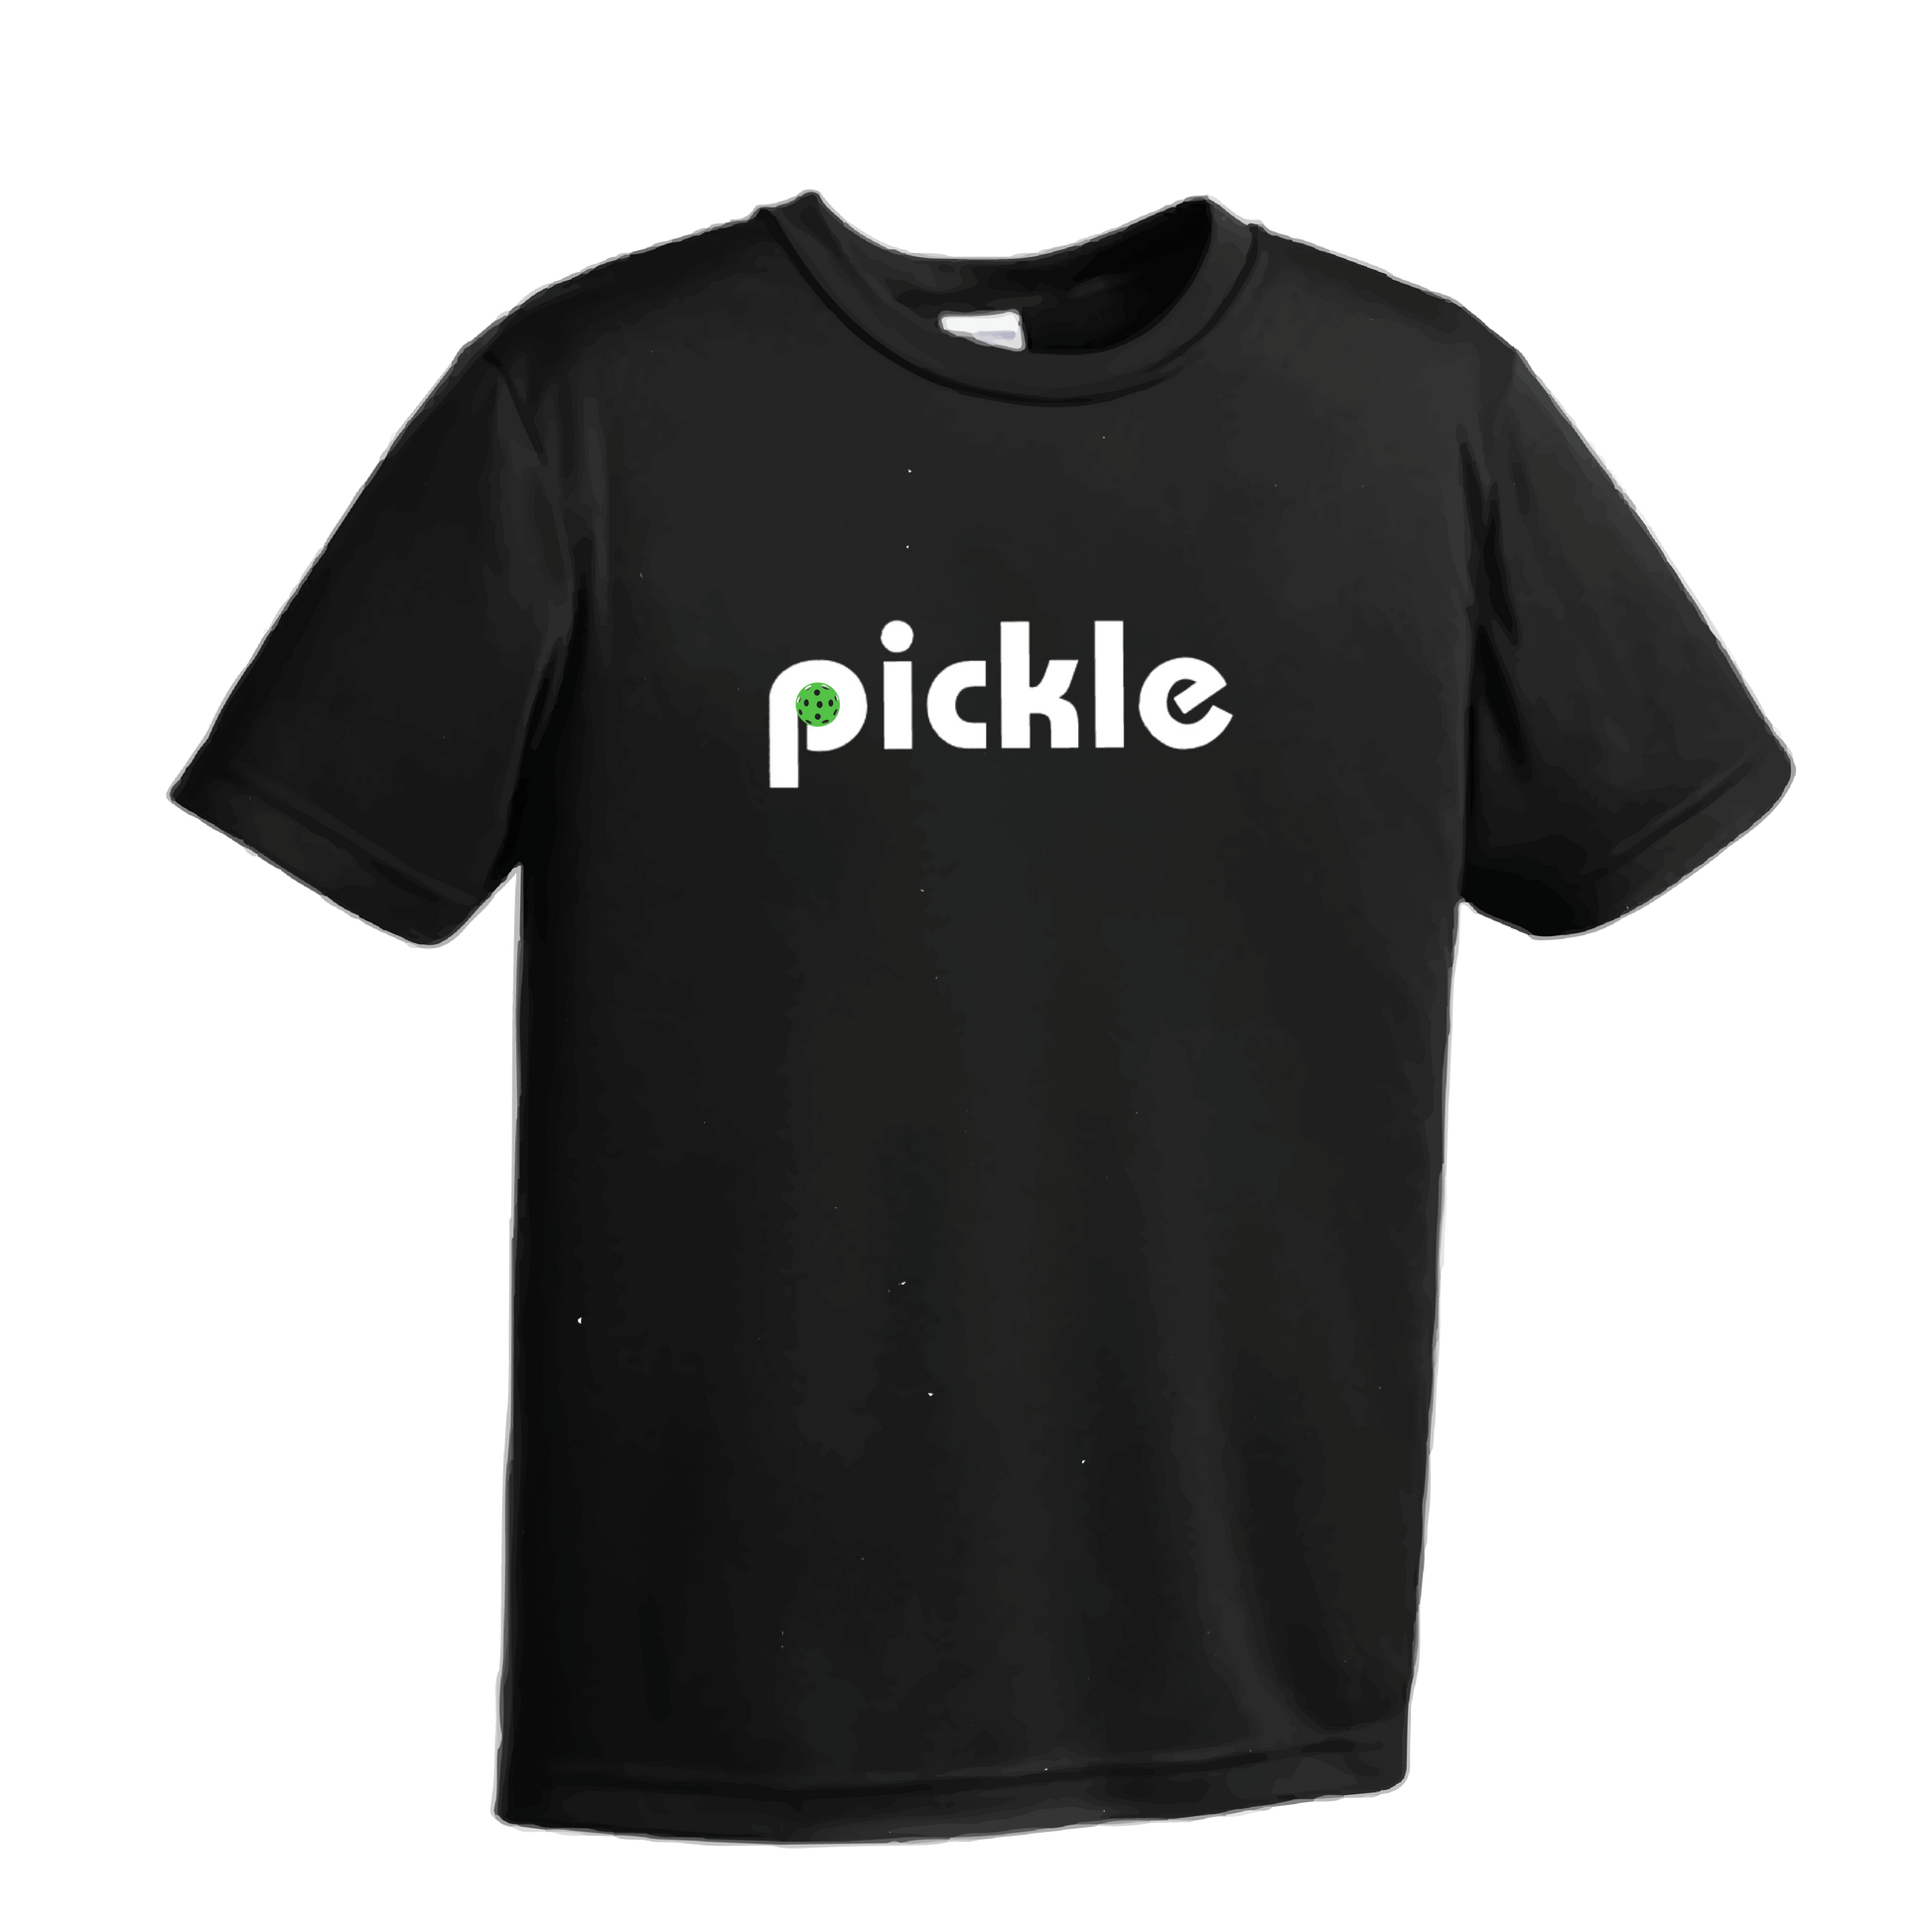 Lightweight, relaxed, and excellent breathability are the hallmarks of our Pickleball shirts. Extra-durable PosiCharge technology ensures vibrant colors that won't fade, so your logo stays bright! Plus, its removable tag and set-in sleeves make it comfortable to wear all day.